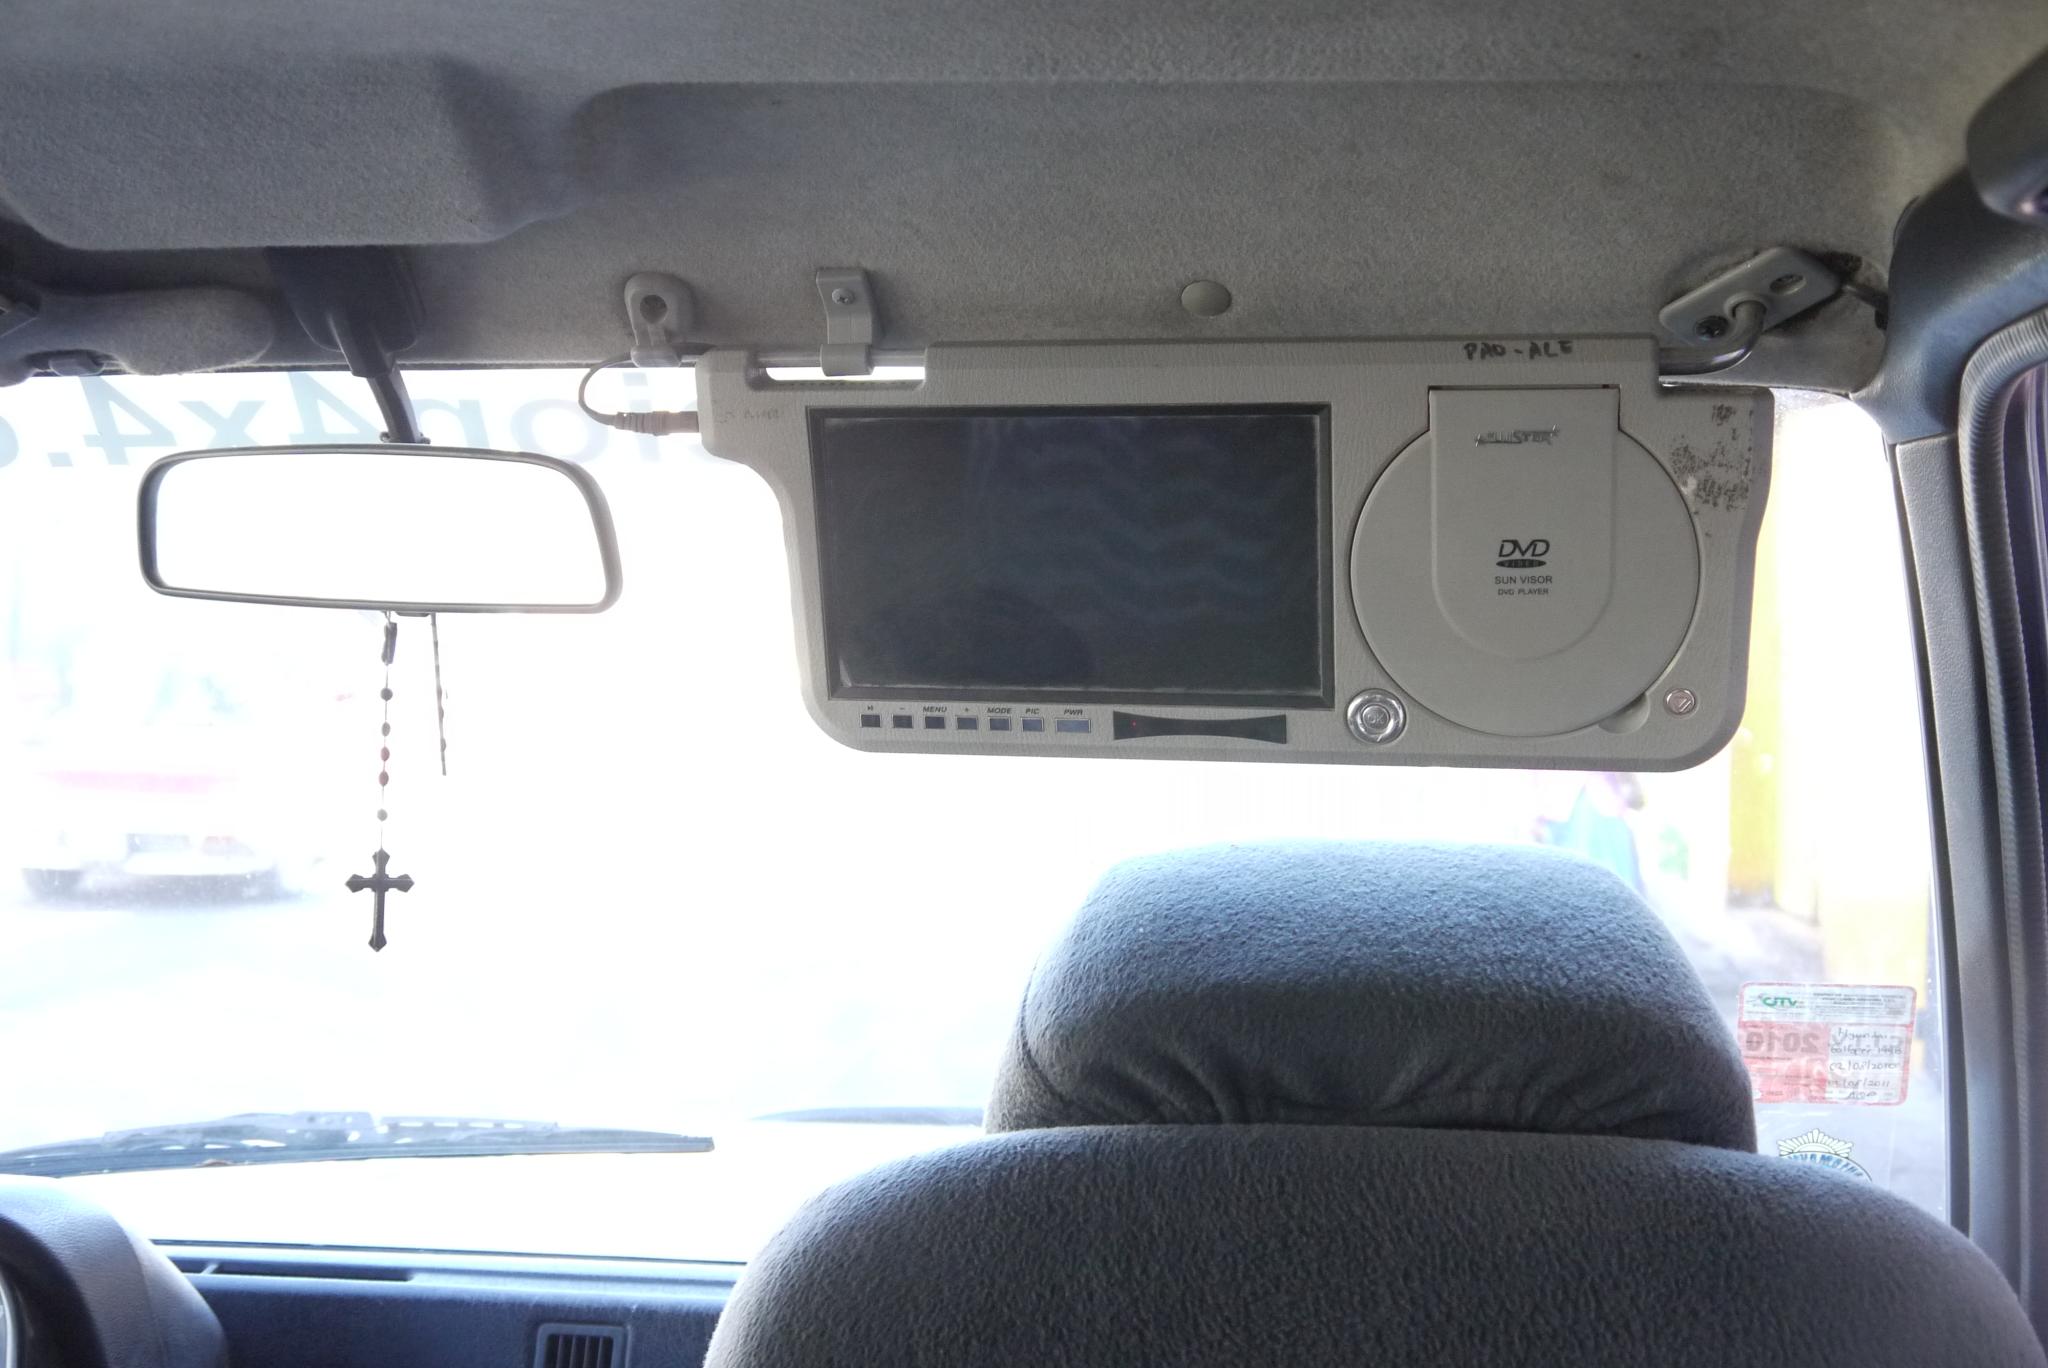 the interior view of a vehicle with the dash board mounted